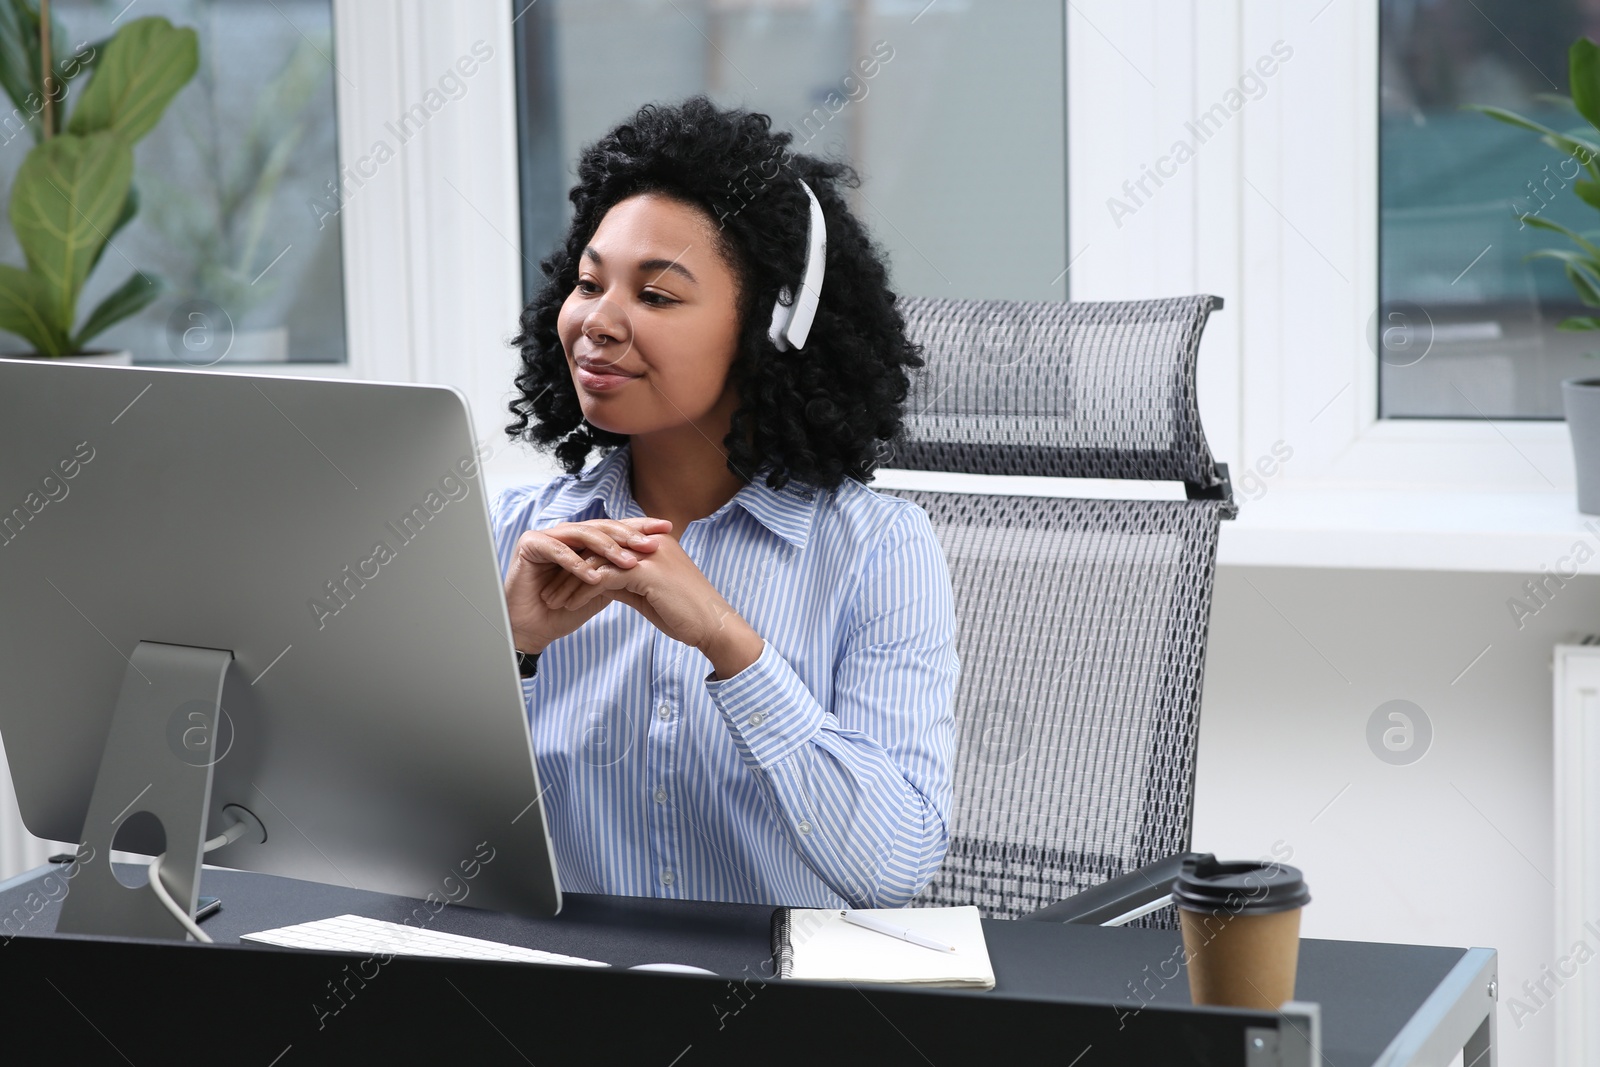 Photo of Young woman with headphones working on computer in office